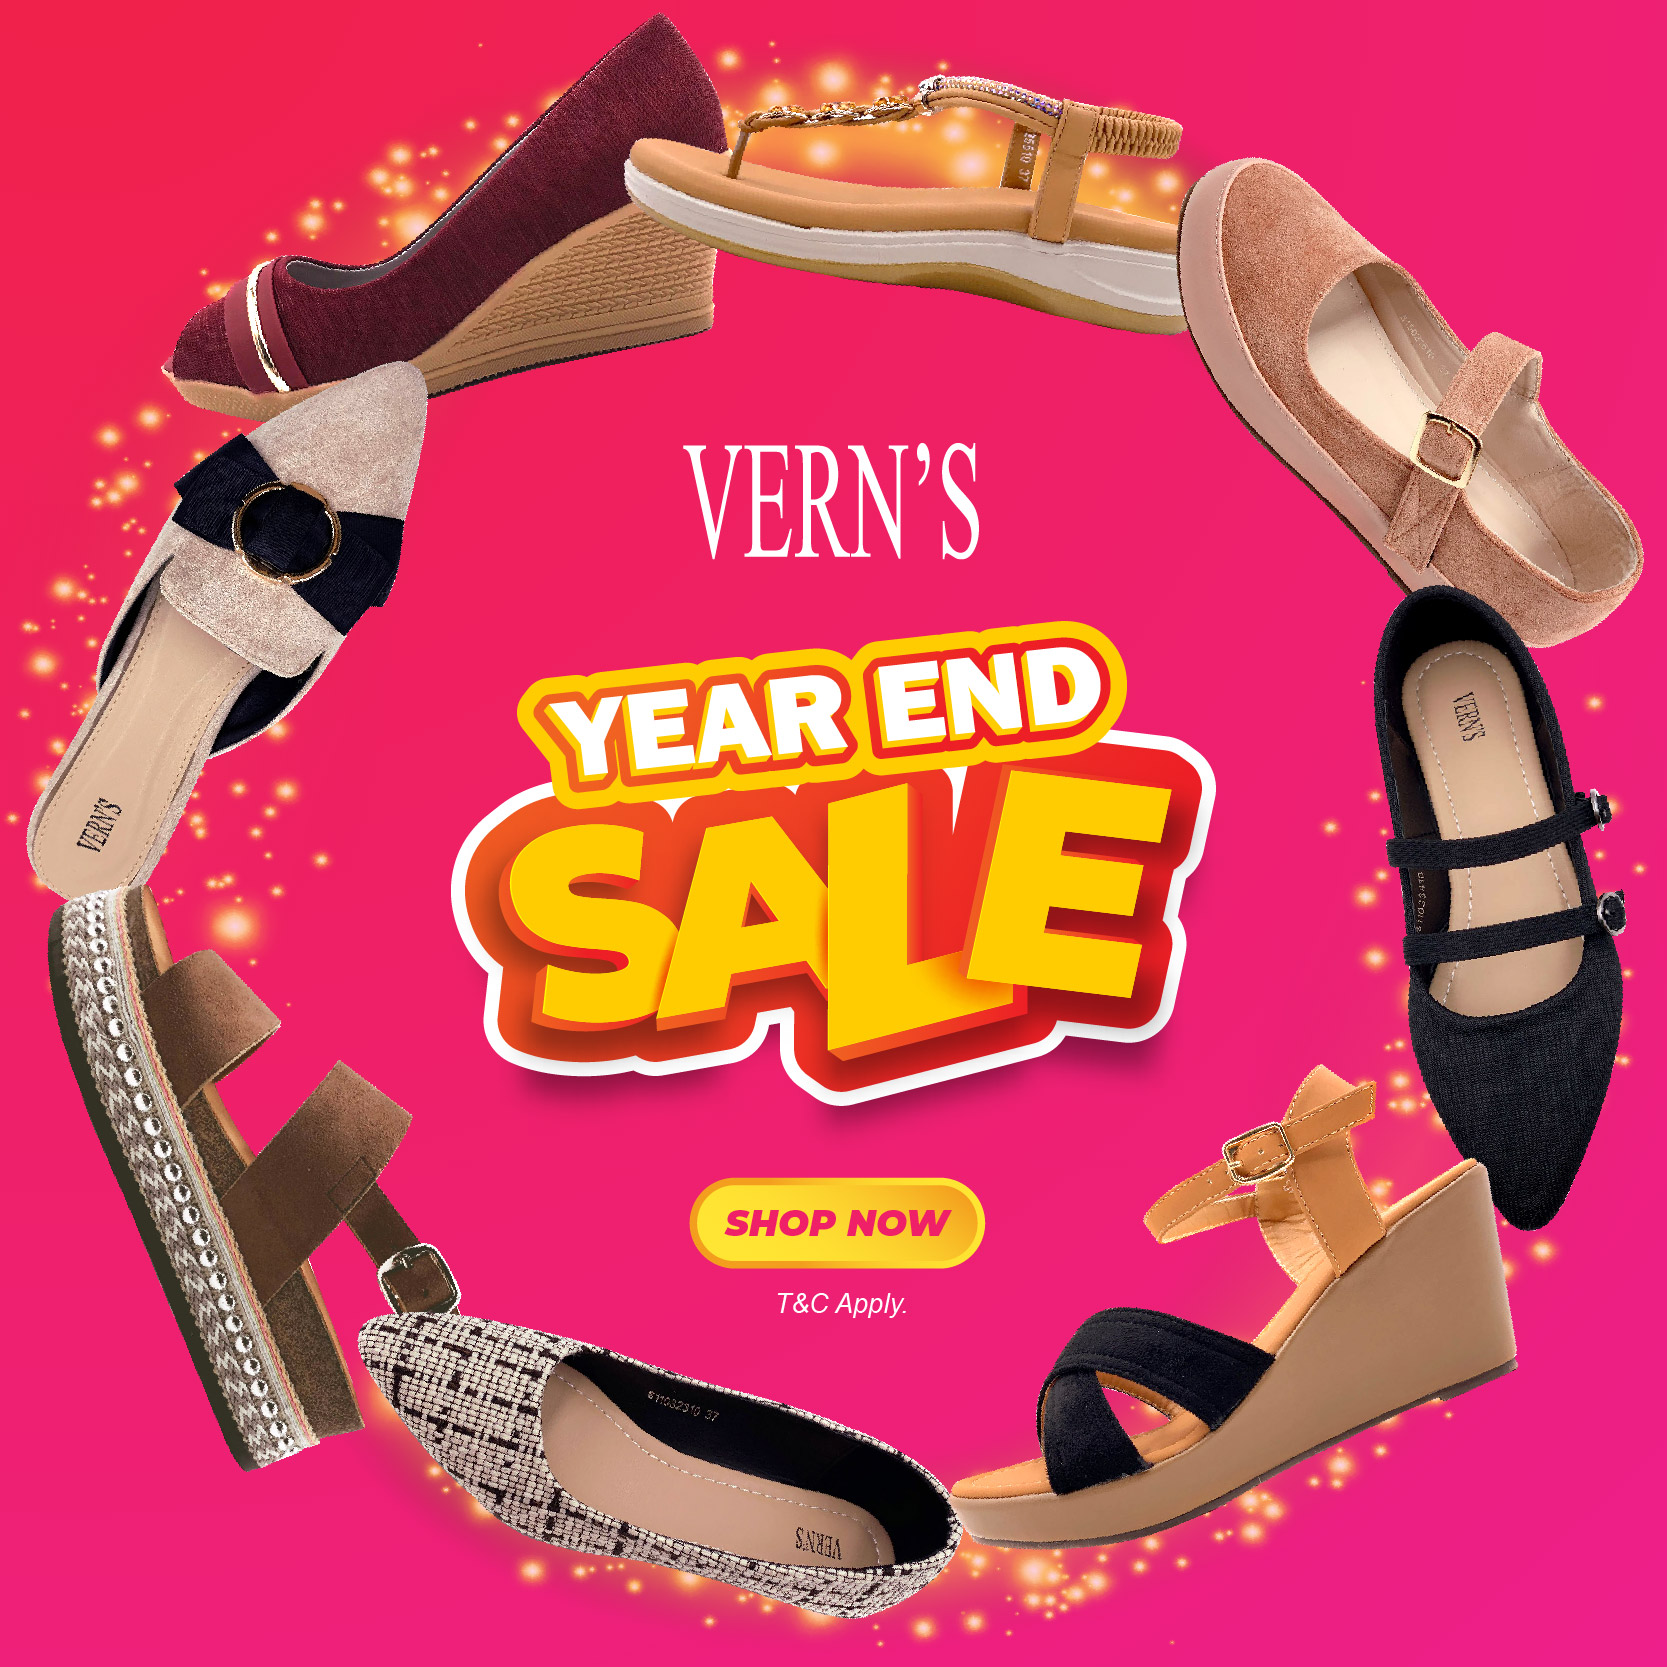 VERN'S YEAR END SALE